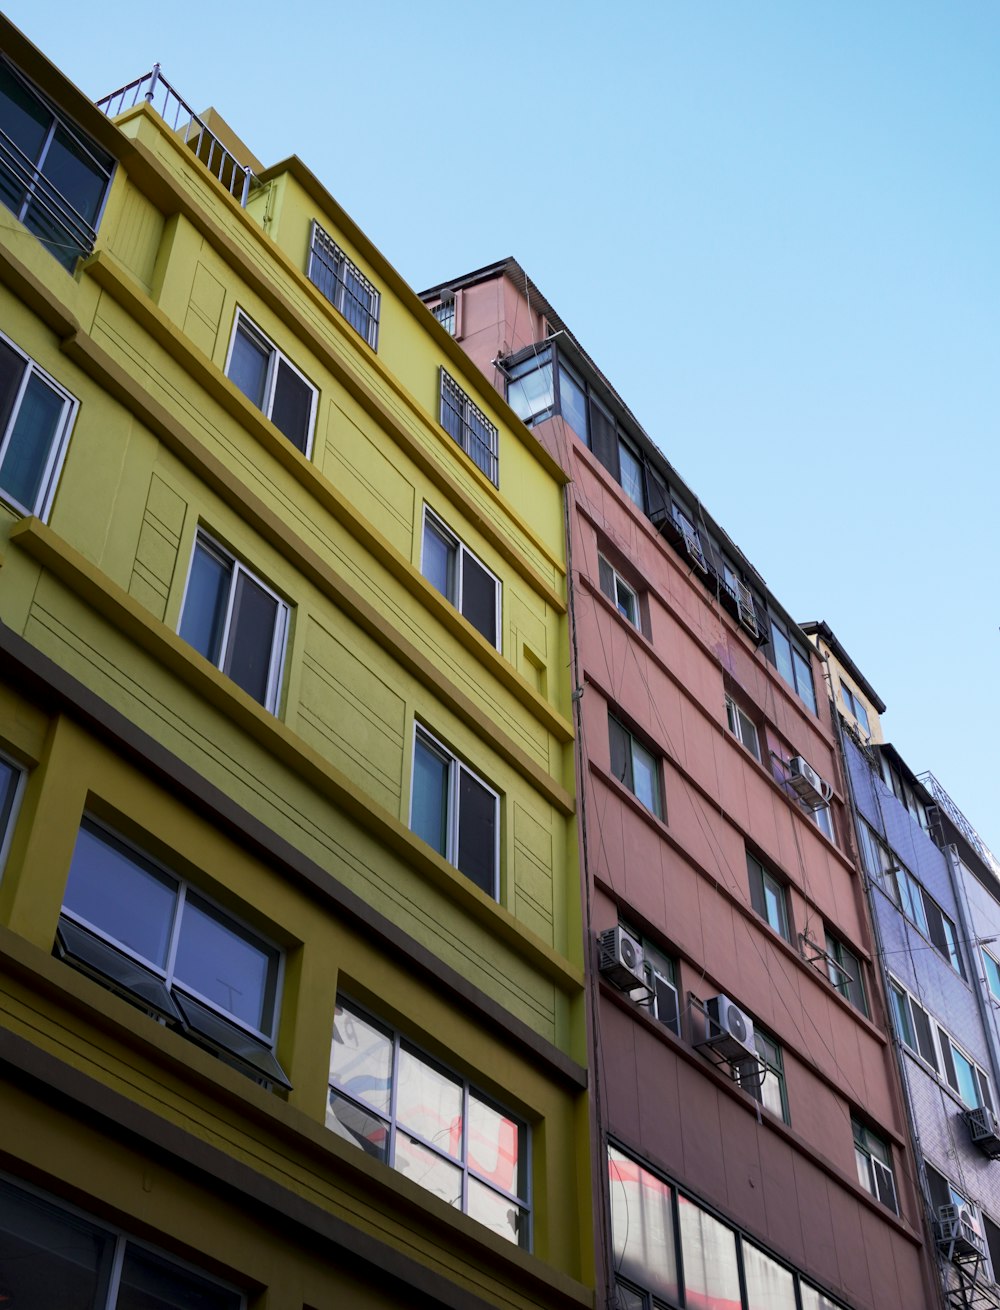 a row of multi - colored buildings with windows and balconies